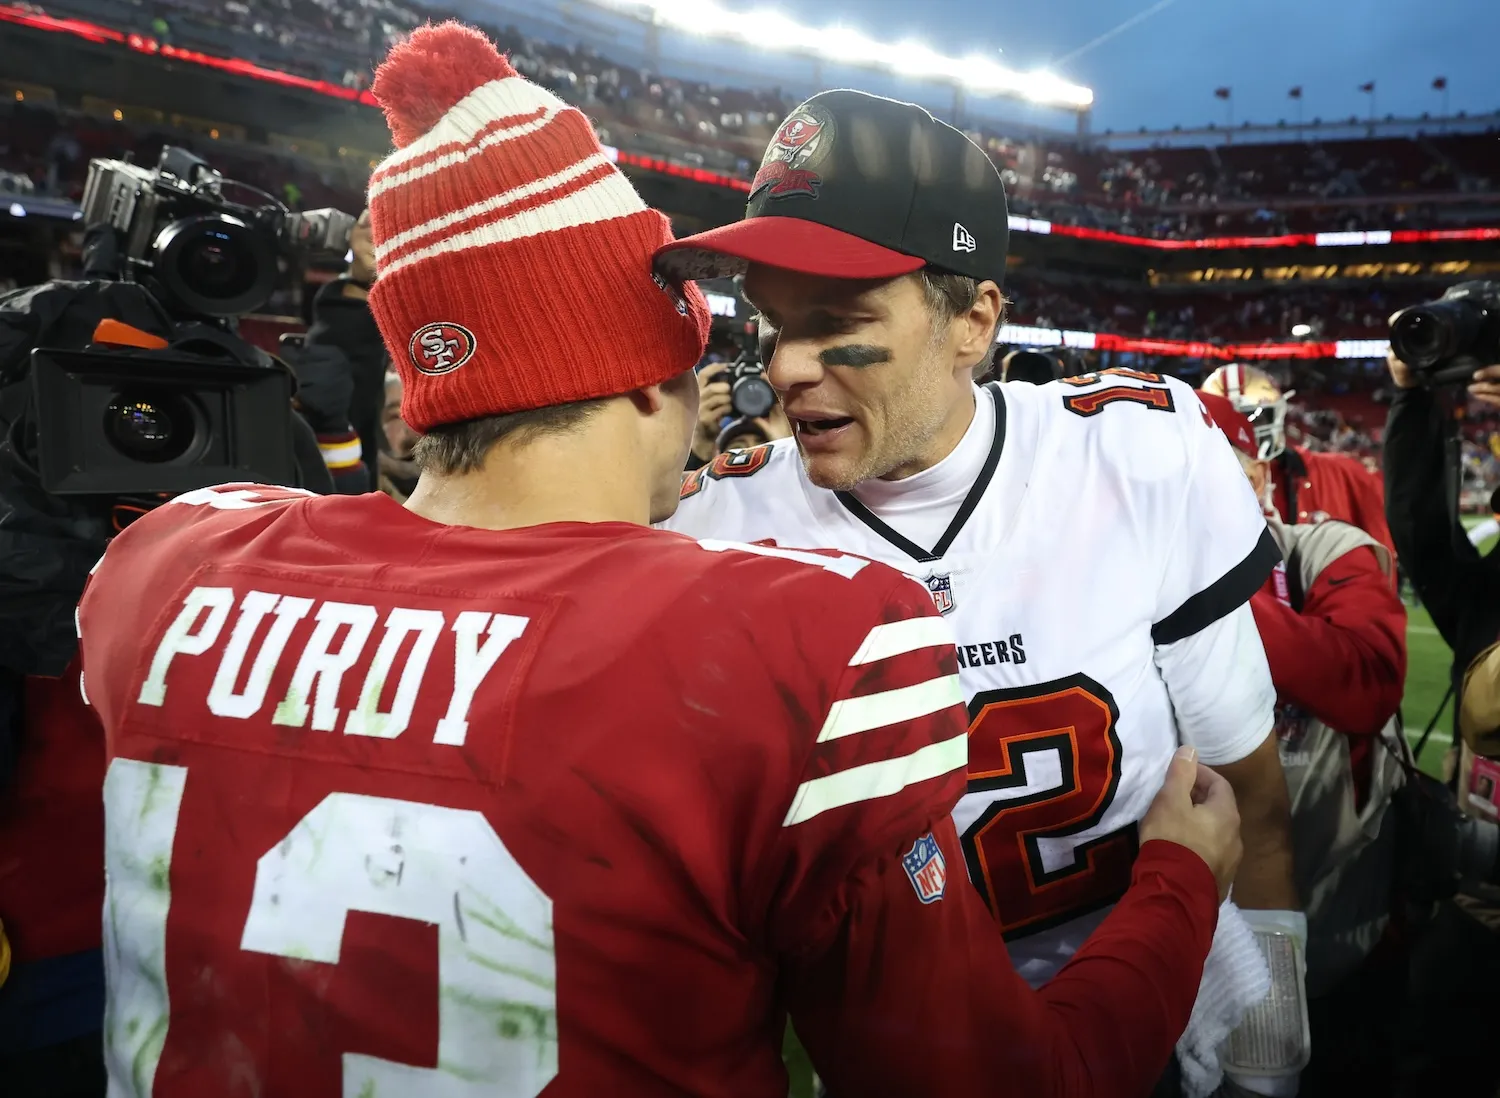 SANTA CLARA, CALIFORNIA - DECEMBER 11: Brock Purdy #13 of the San Francisco 49ers talks with Tom Brady #12 of the Tampa Bay Buccaneers following the game at Levi's Stadium on December 11, 2022 in Santa Clara, California. San Francisco defeated Tampa Bay 35-7. (Photo by Lachlan Cunningham/Getty Images)